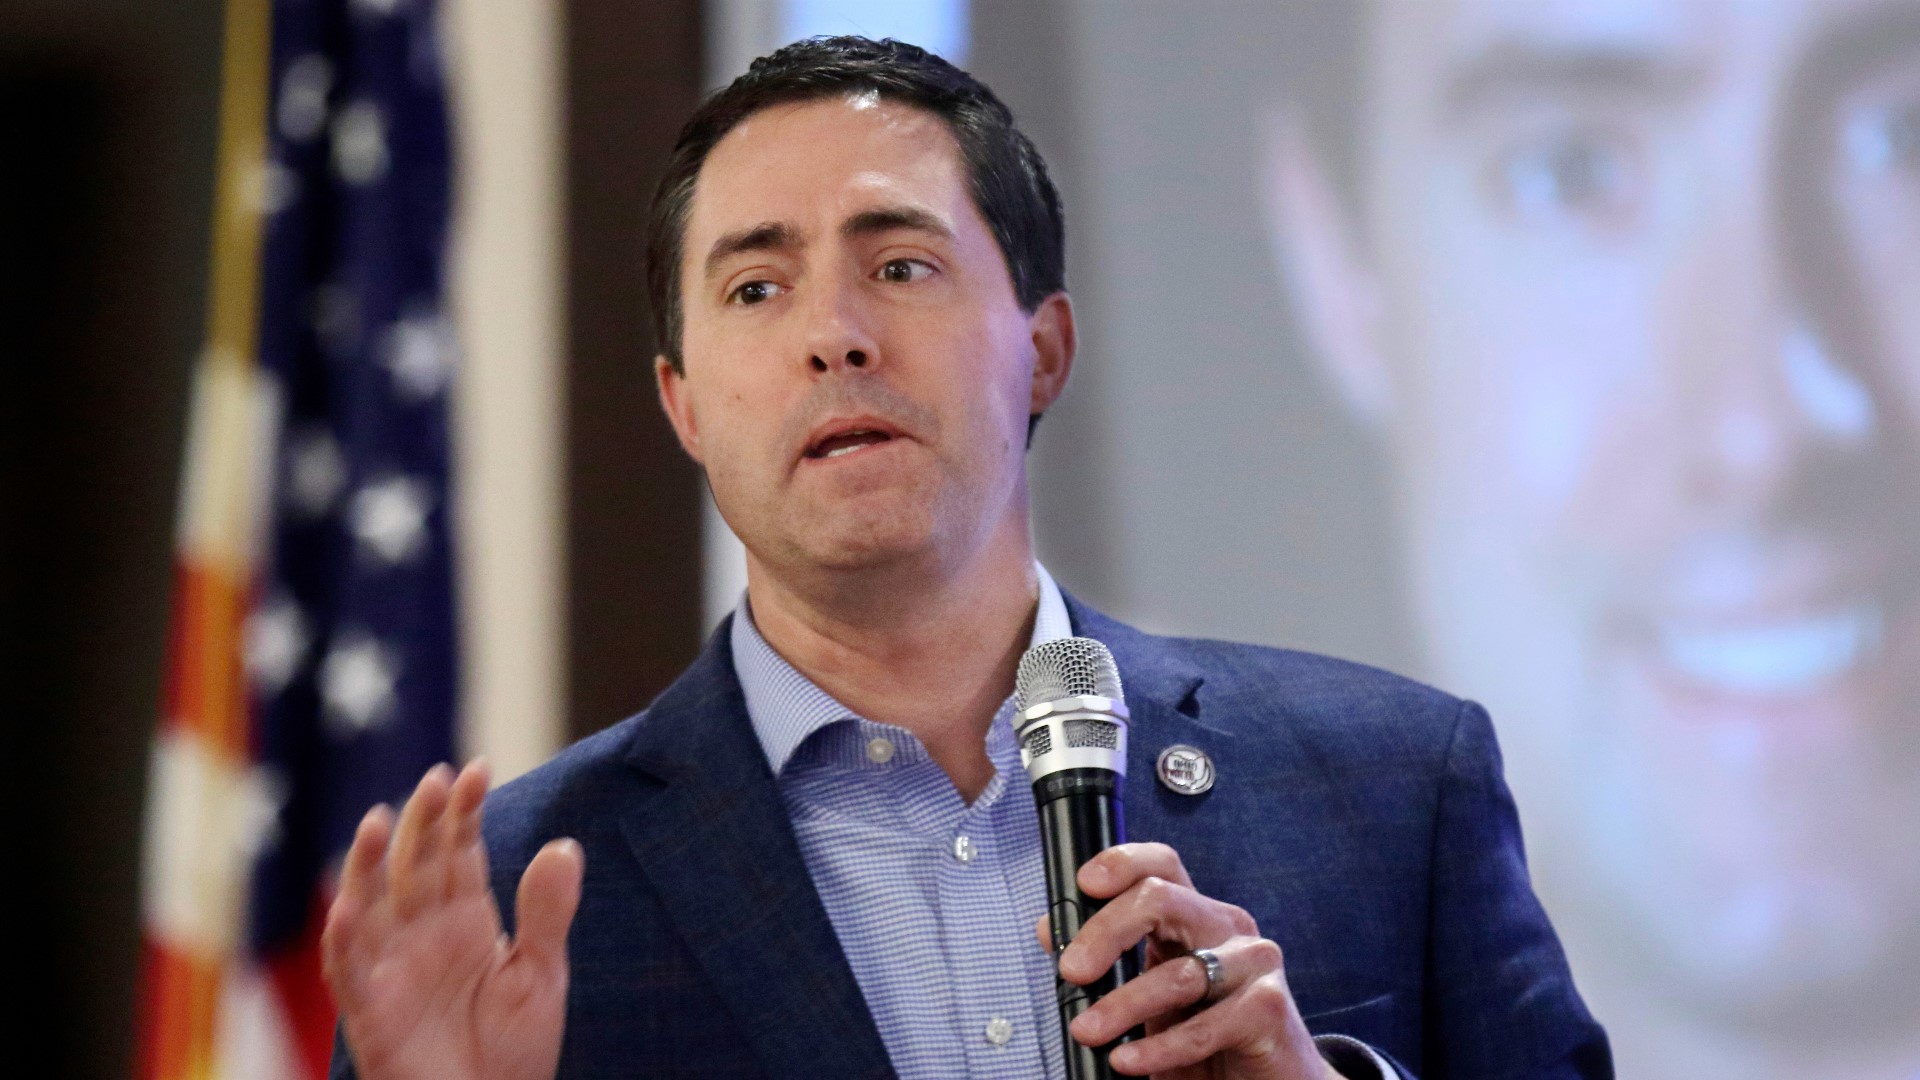 The Libertarian Party of Ohio has accused Secretary of State Frank LaRose of violating federal law for campaigning in favor of Issue 1.